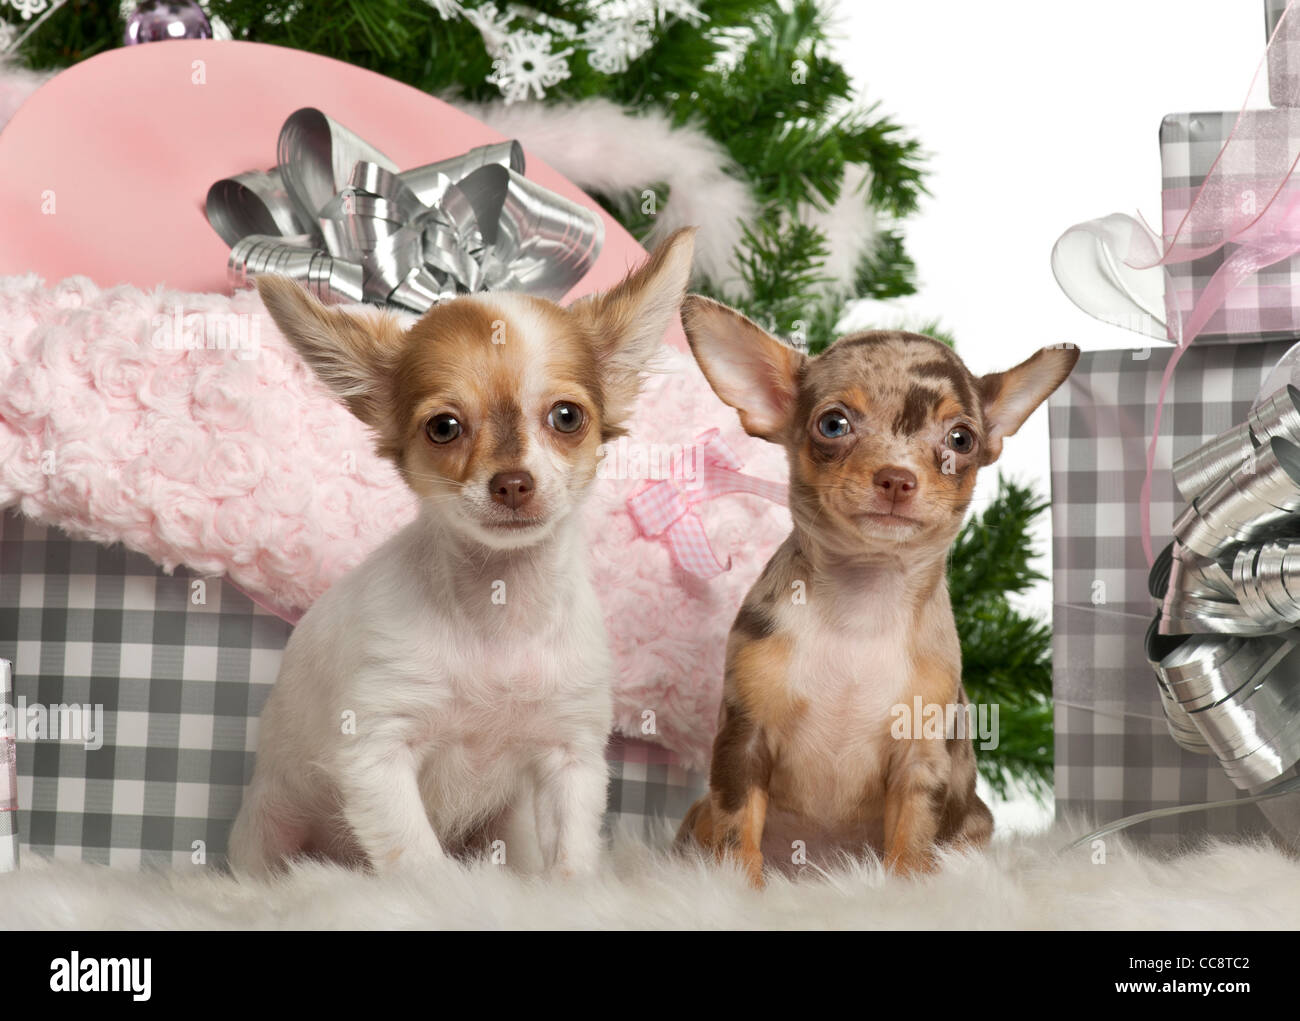 Chihuahua puppies, 4 months old, sitting with Christmas tree and gifts in front of white background Stock Photo